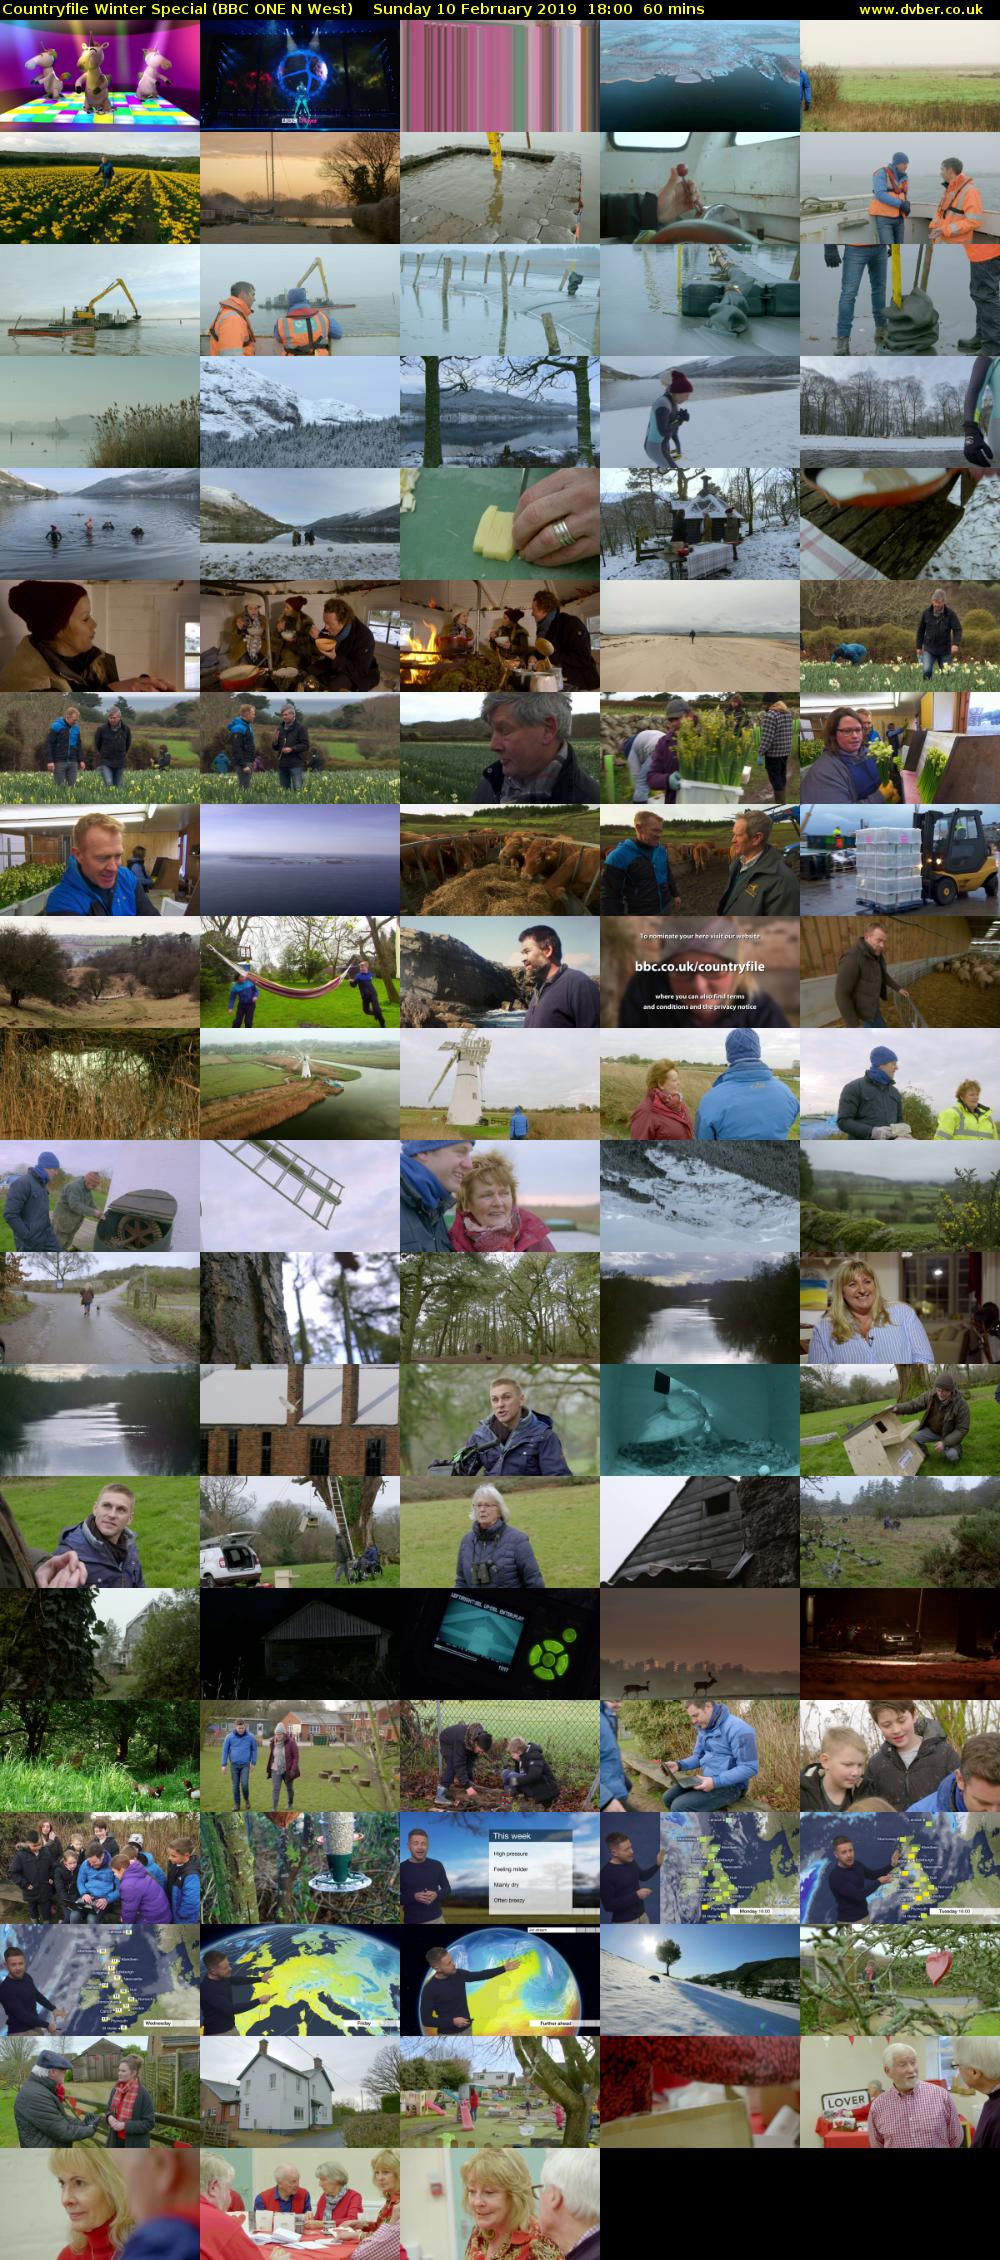 Countryfile Winter Special (BBC ONE N West) Sunday 10 February 2019 18:00 - 19:00